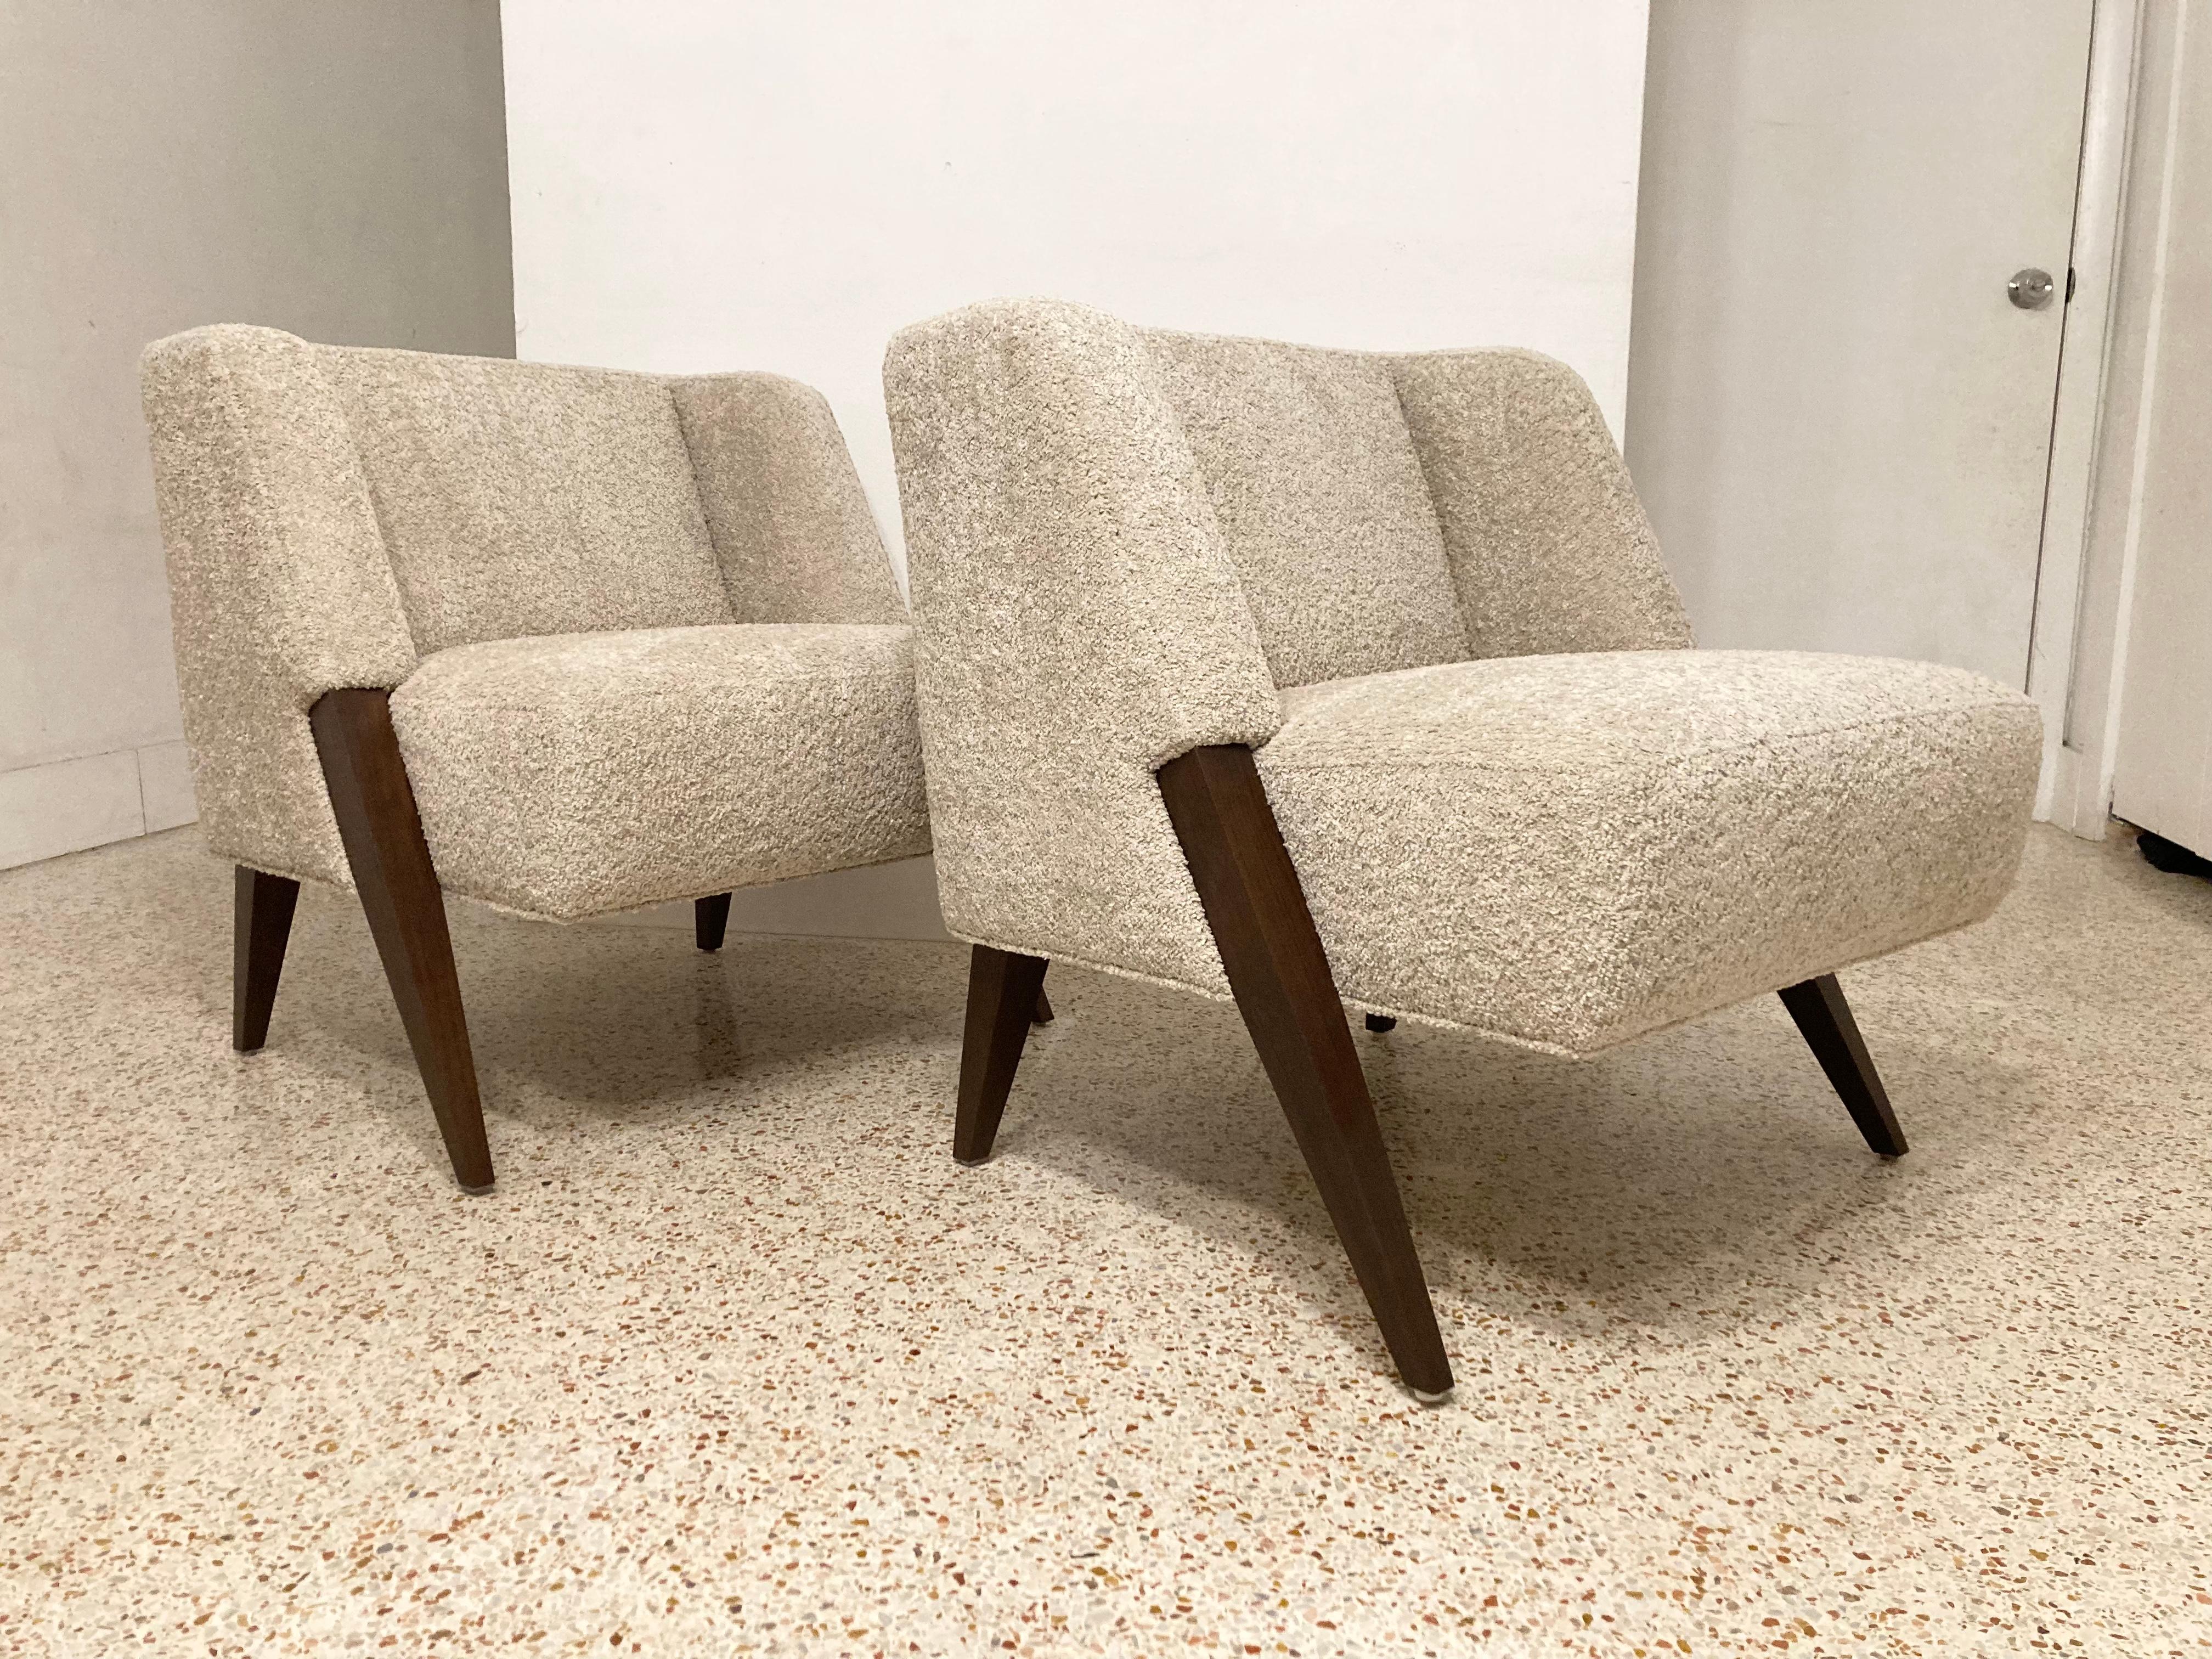 American Pair of Lounge Chairs Attributed to Gio Ponti, Walnut and Bouclé Fabric